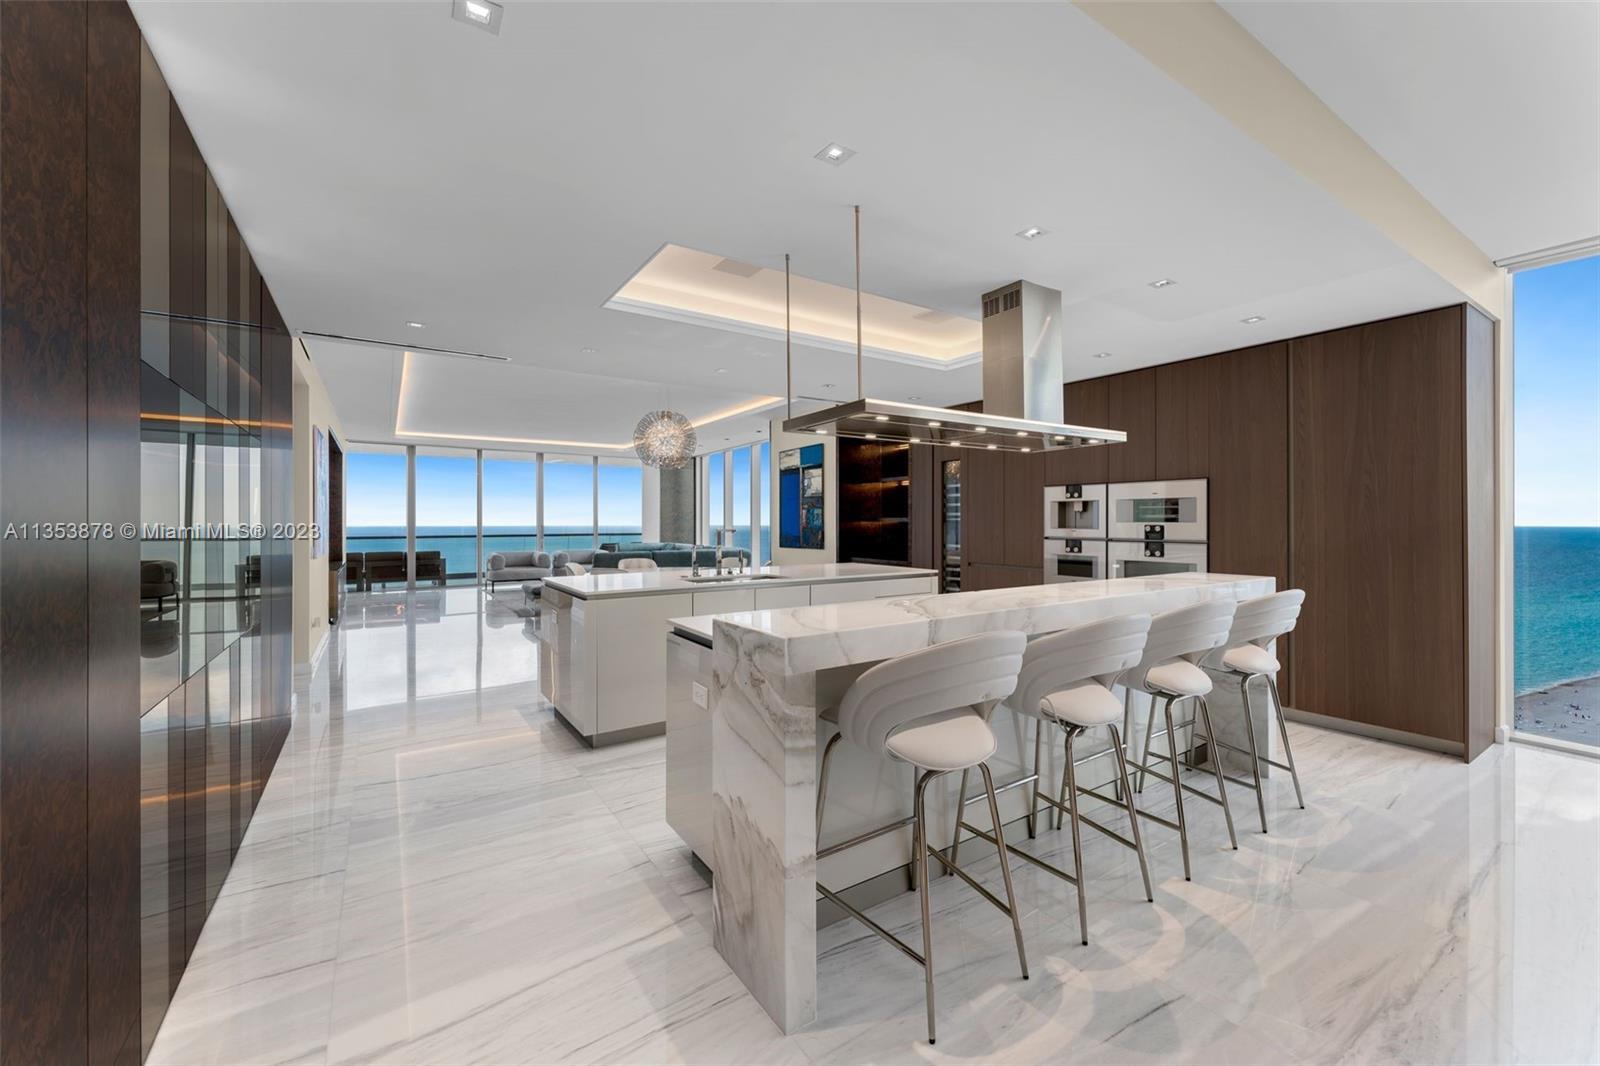 This luxurious, one-of-a-kind 4 bedroom, 4+1 half bathroom home in the sky at the coveted Turnberry 